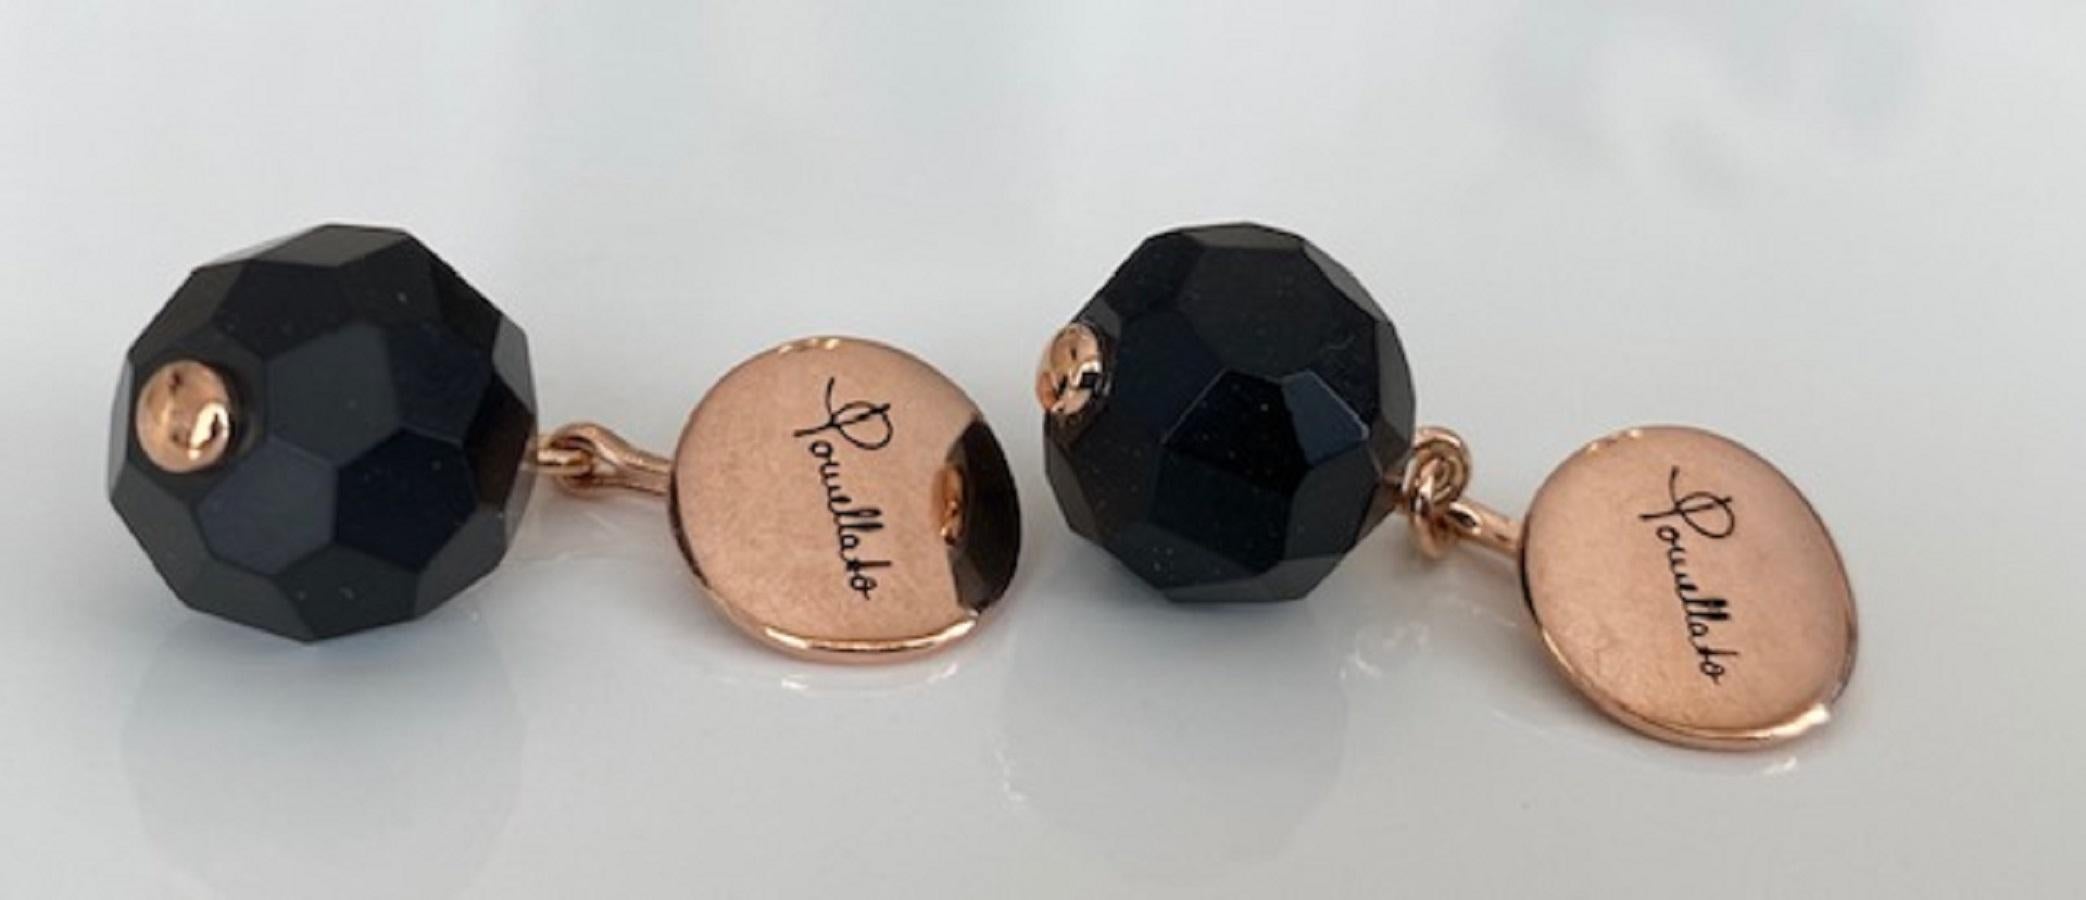 Pomellato - 9 carat Rose gold - Cufflinks ebony
Offered: 9 kt Pomellato rose gold cufflinks with faceted black ebony. The cuff buttons are in good condition.
Signed Pomellato, 375 and numbered C800045695, 2053MI
Grade: 375 (engraved)
Size: 35 mm*16